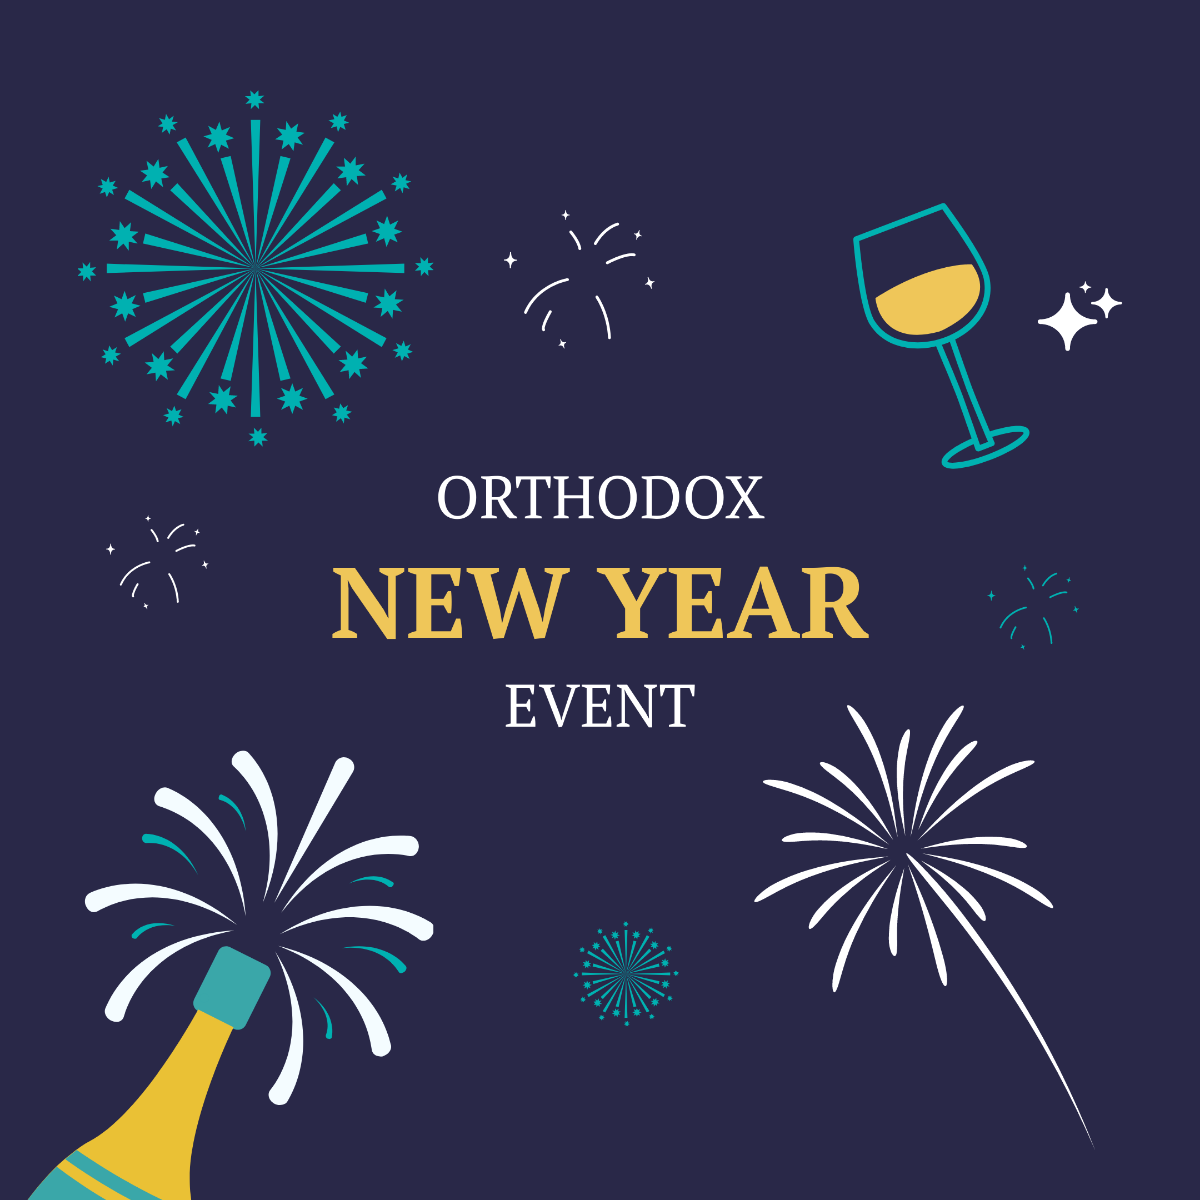 Orthodox New Year Event Instagram Post